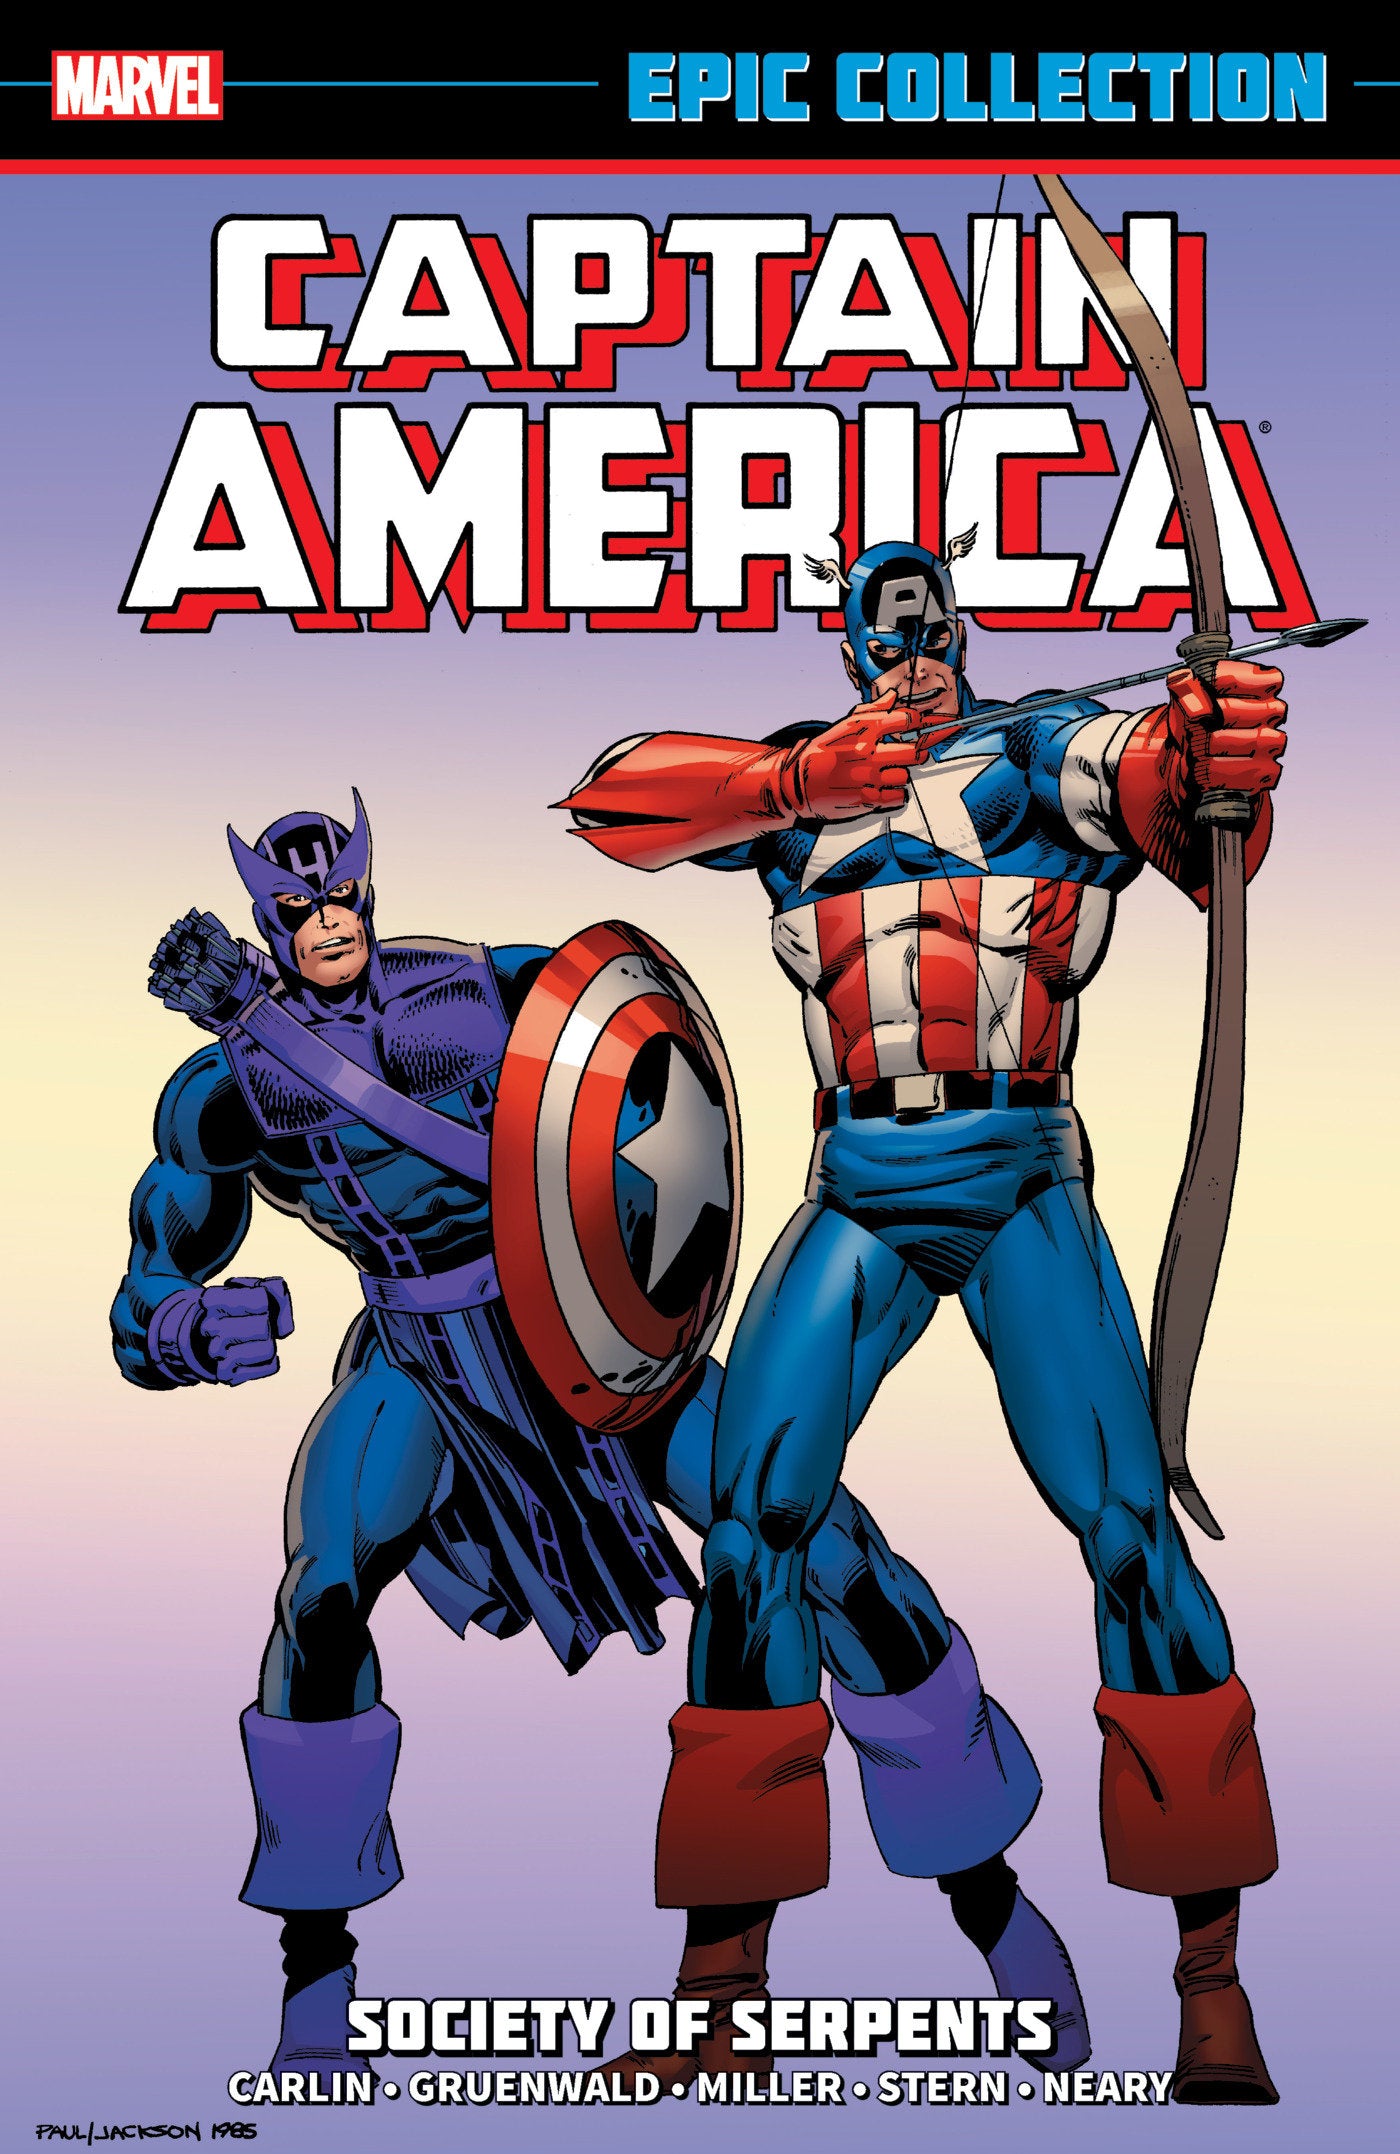 CAPTAIN AMERICA EPIC COLLECTION: SOCIETY OF SERPENTS TRADE PAPERBACK